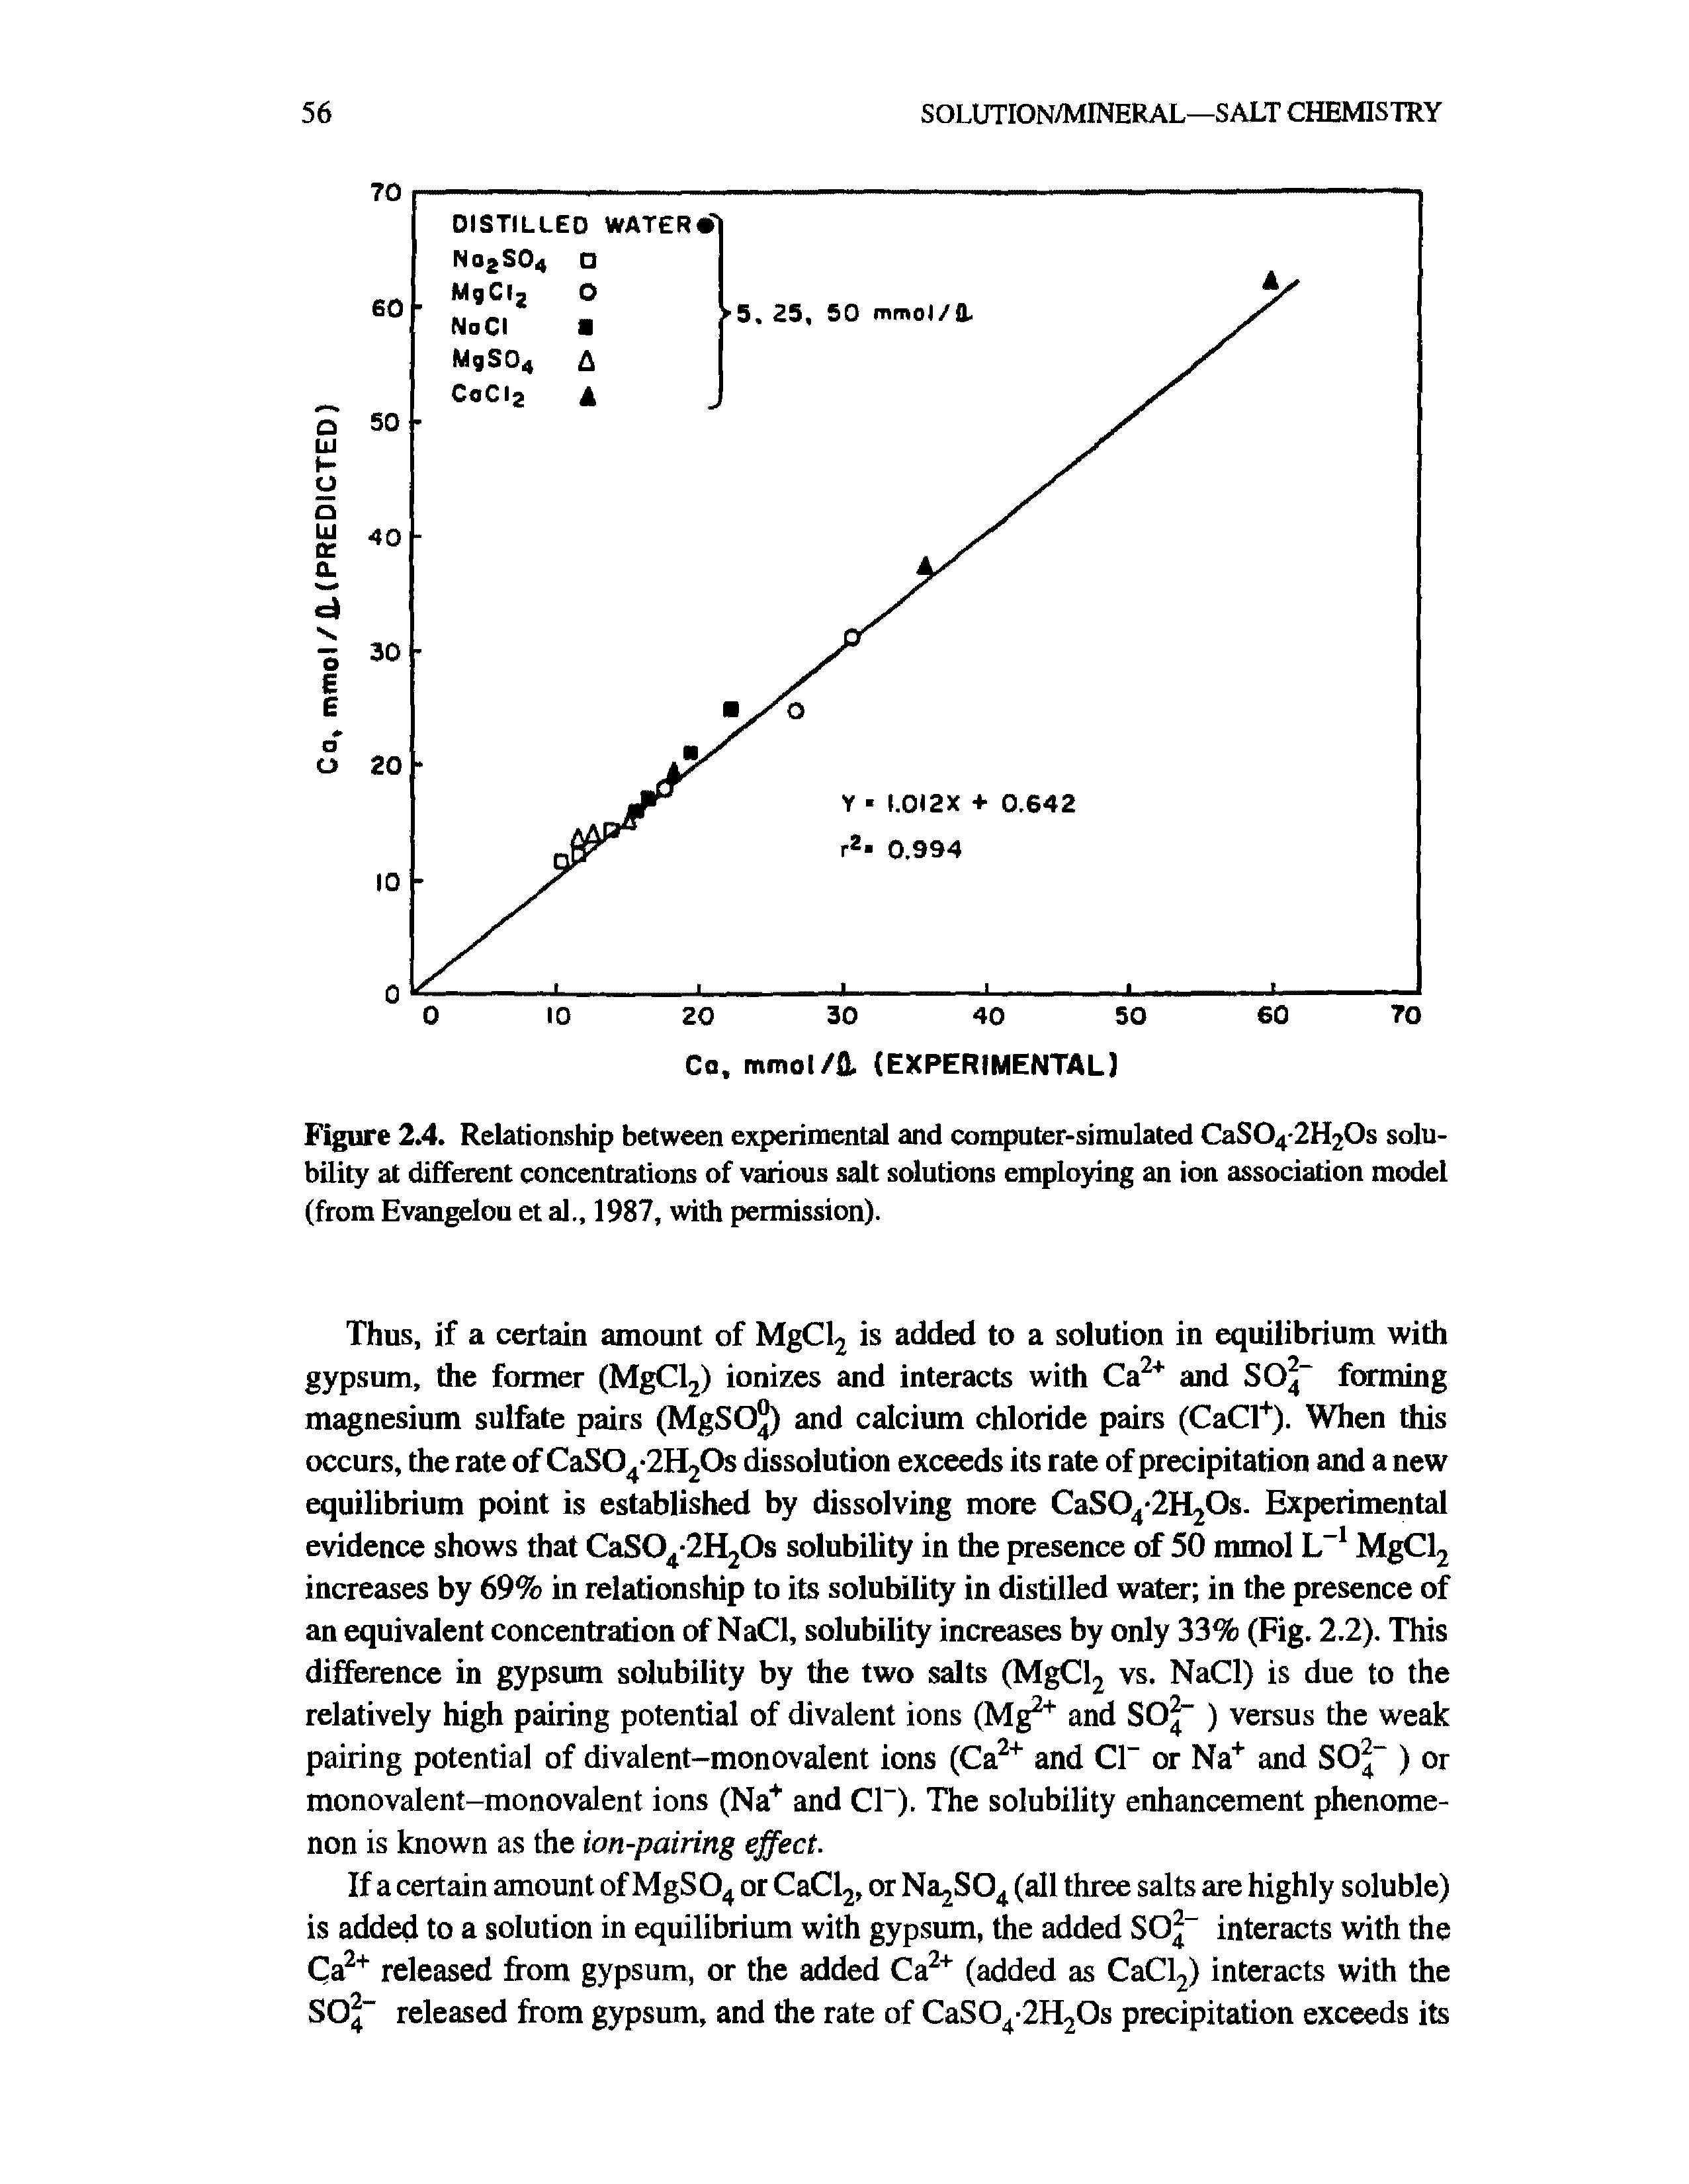 Figure 2.4. Relationship between experimental and computer-simulated CaSO H Os solubility at different concentrations of various salt solutions employing an ion association model (from Evangelou et a]., 1987, with permission).